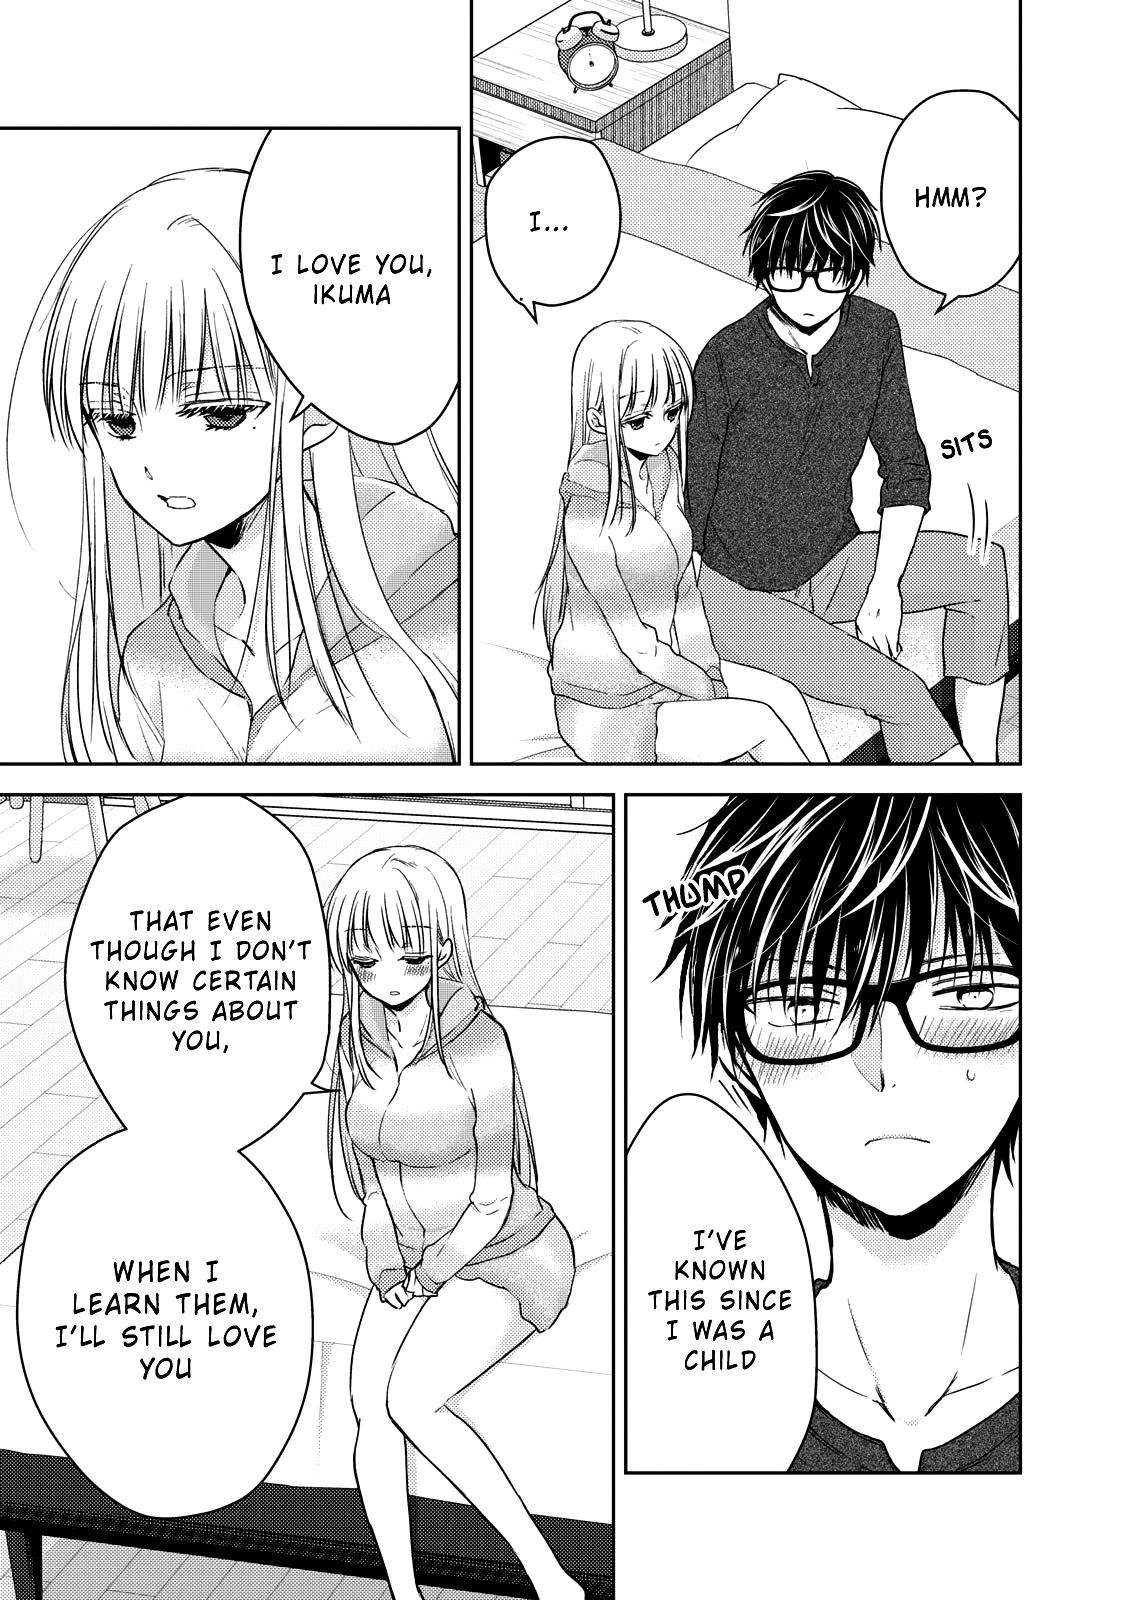 We May Be An Inexperienced Couple But... Vol. 4 Ch. 31